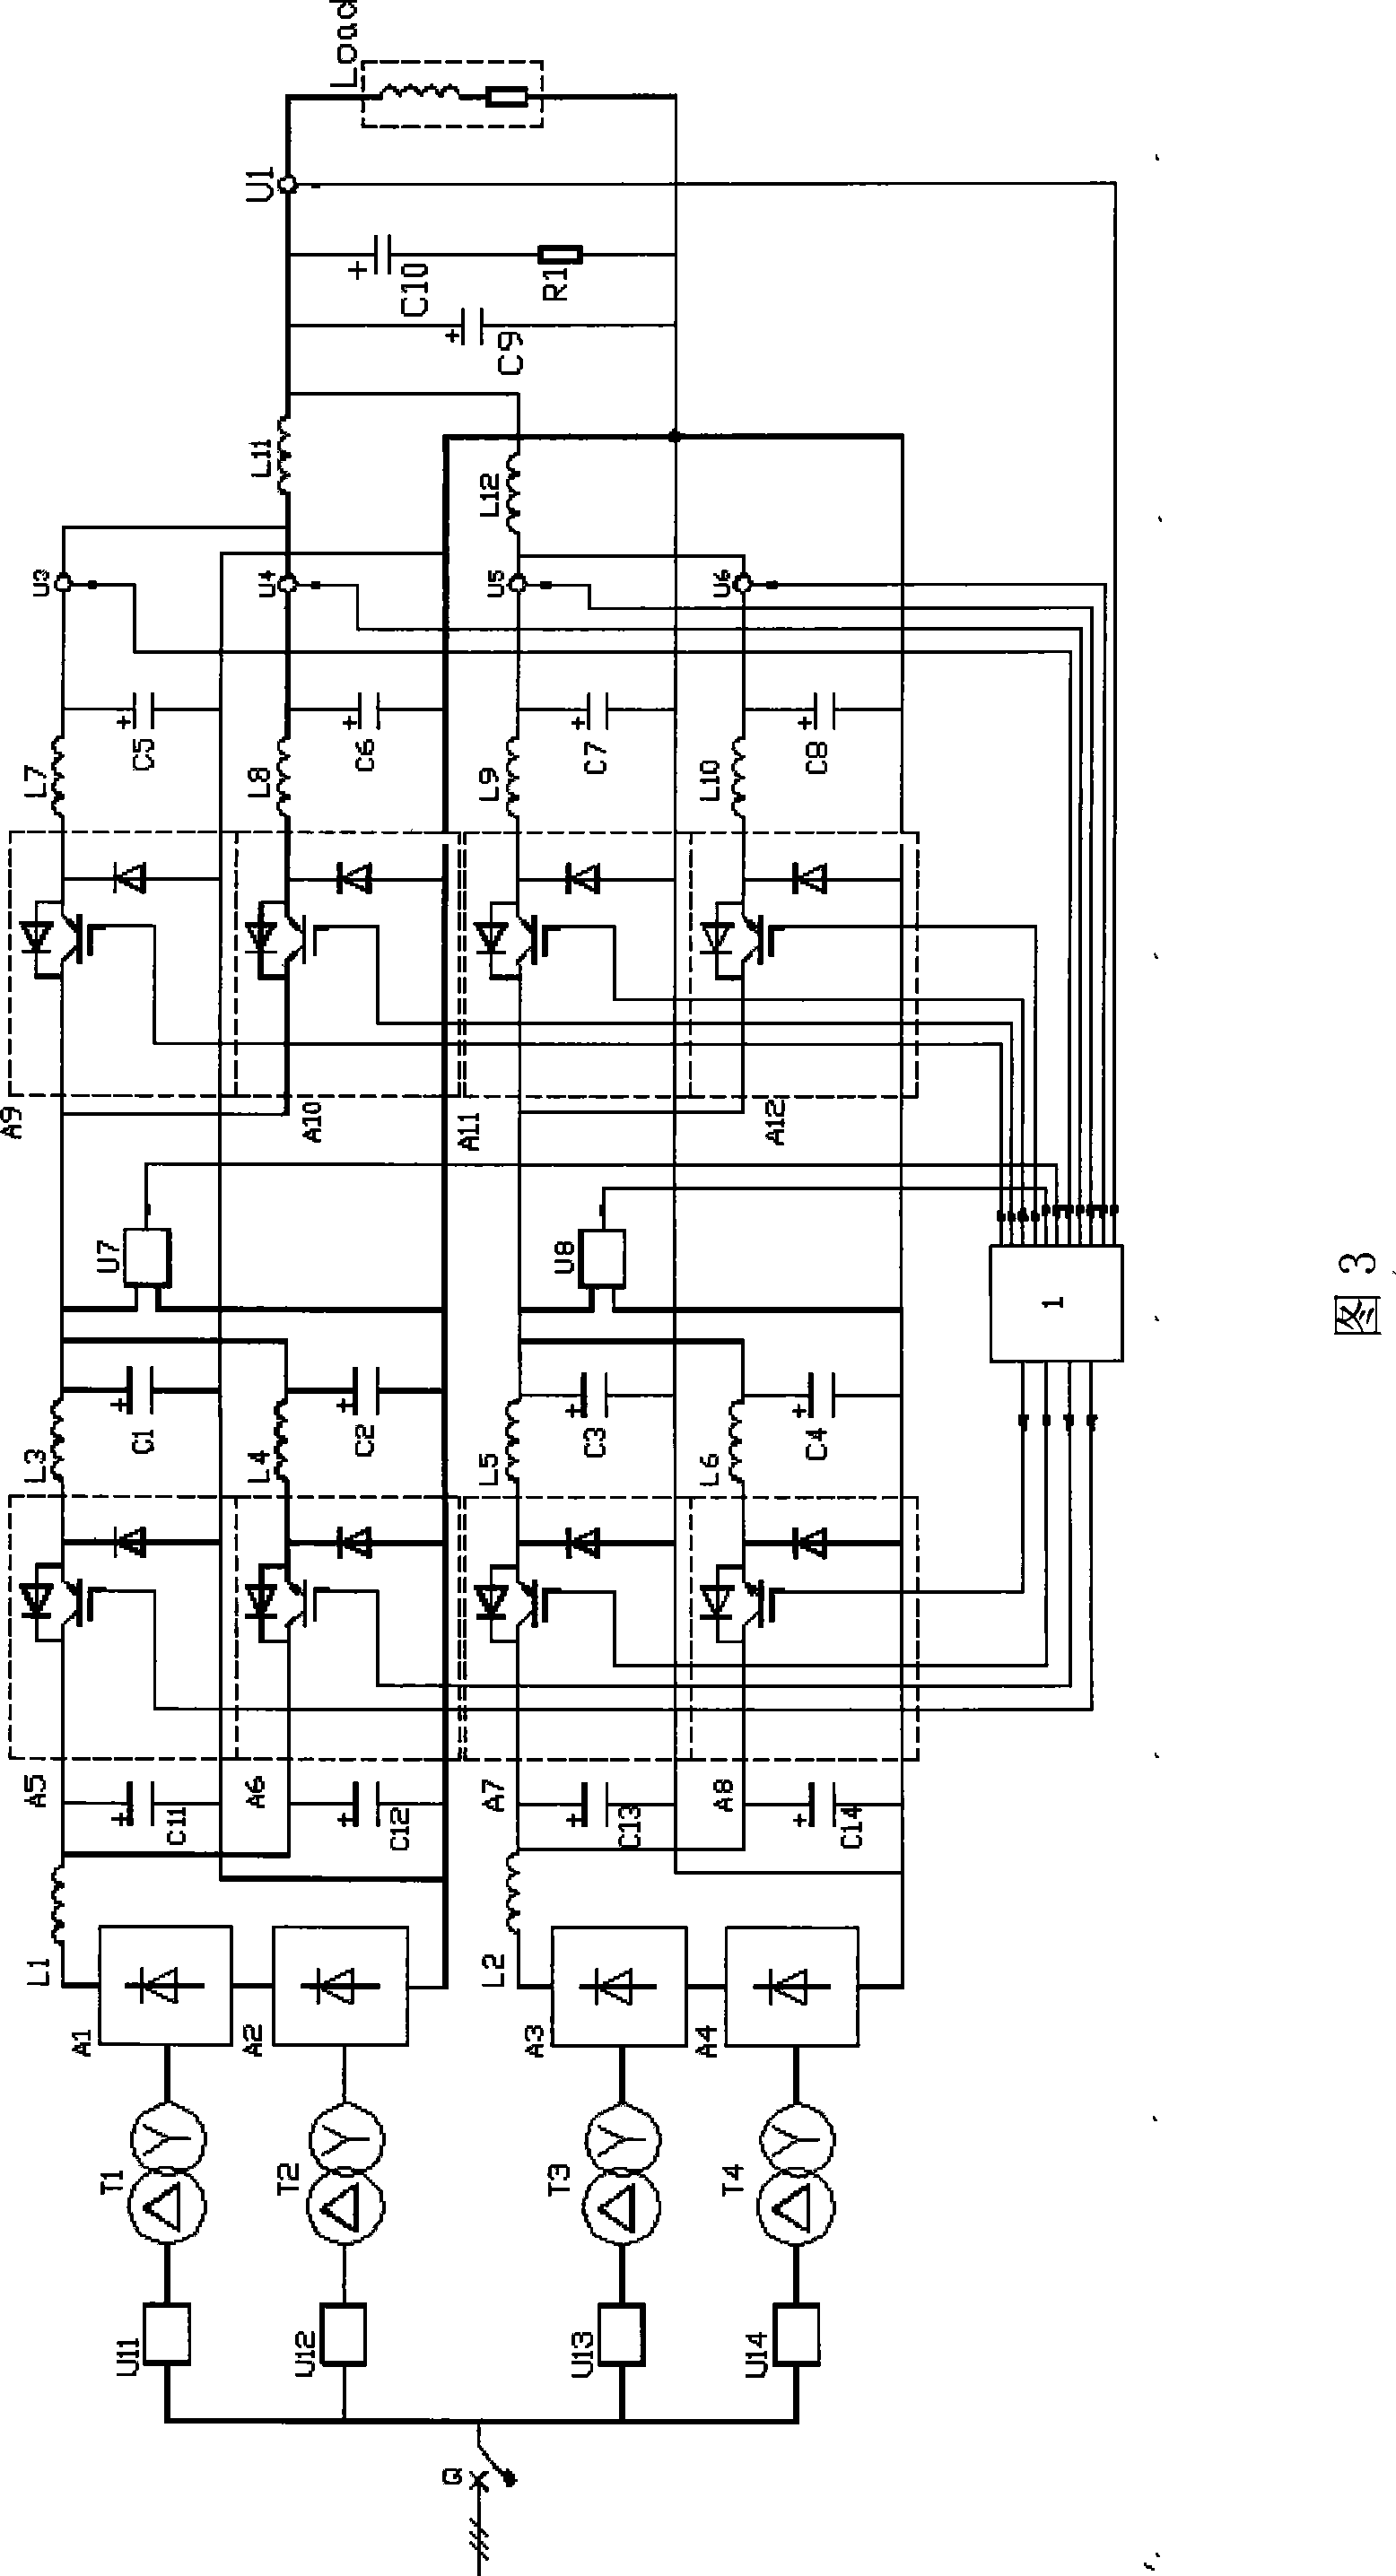 DC constant current power supply with low ripple implemented through mixing IGBT series and parallel connections